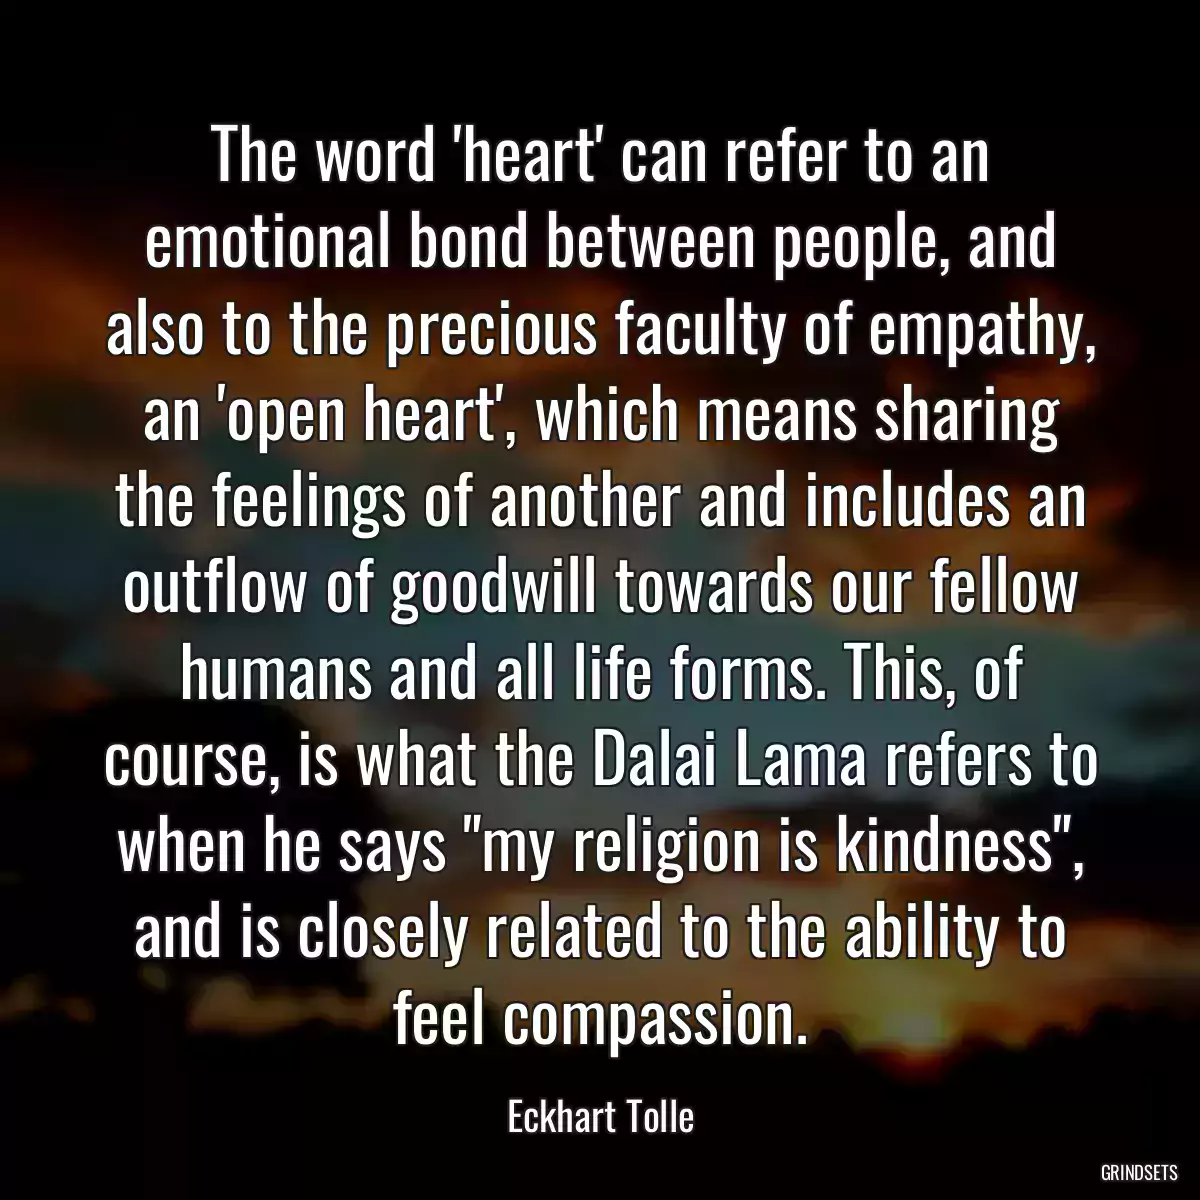 The word \'heart\' can refer to an emotional bond between people, and also to the precious faculty of empathy, an \'open heart\', which means sharing the feelings of another and includes an outflow of goodwill towards our fellow humans and all life forms. This, of course, is what the Dalai Lama refers to when he says \